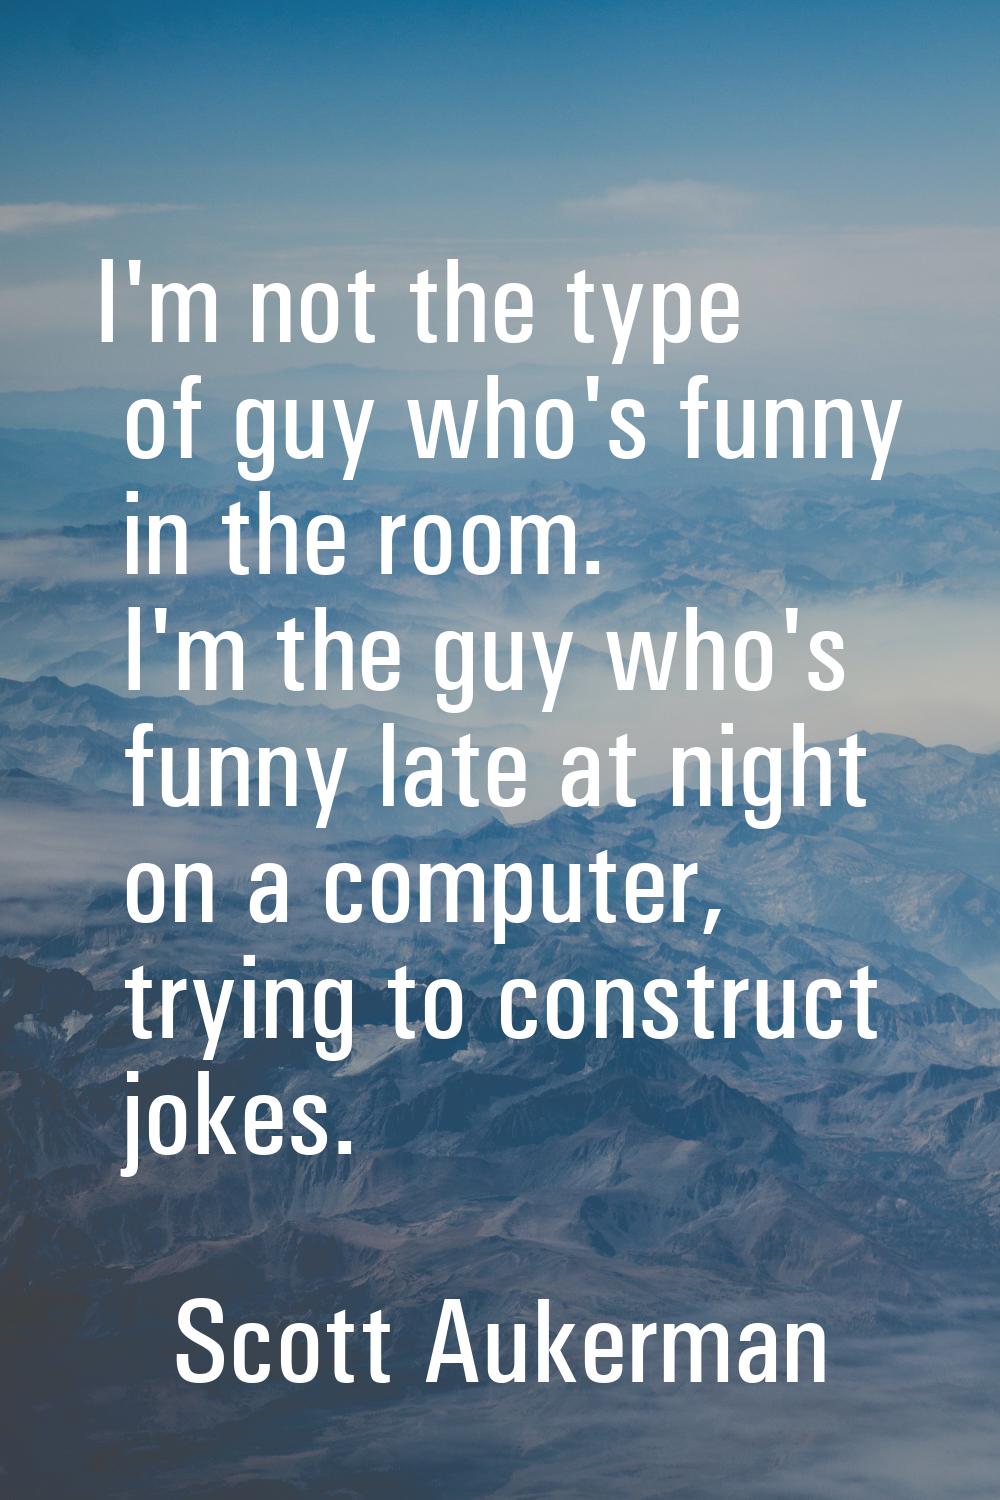 I'm not the type of guy who's funny in the room. I'm the guy who's funny late at night on a compute